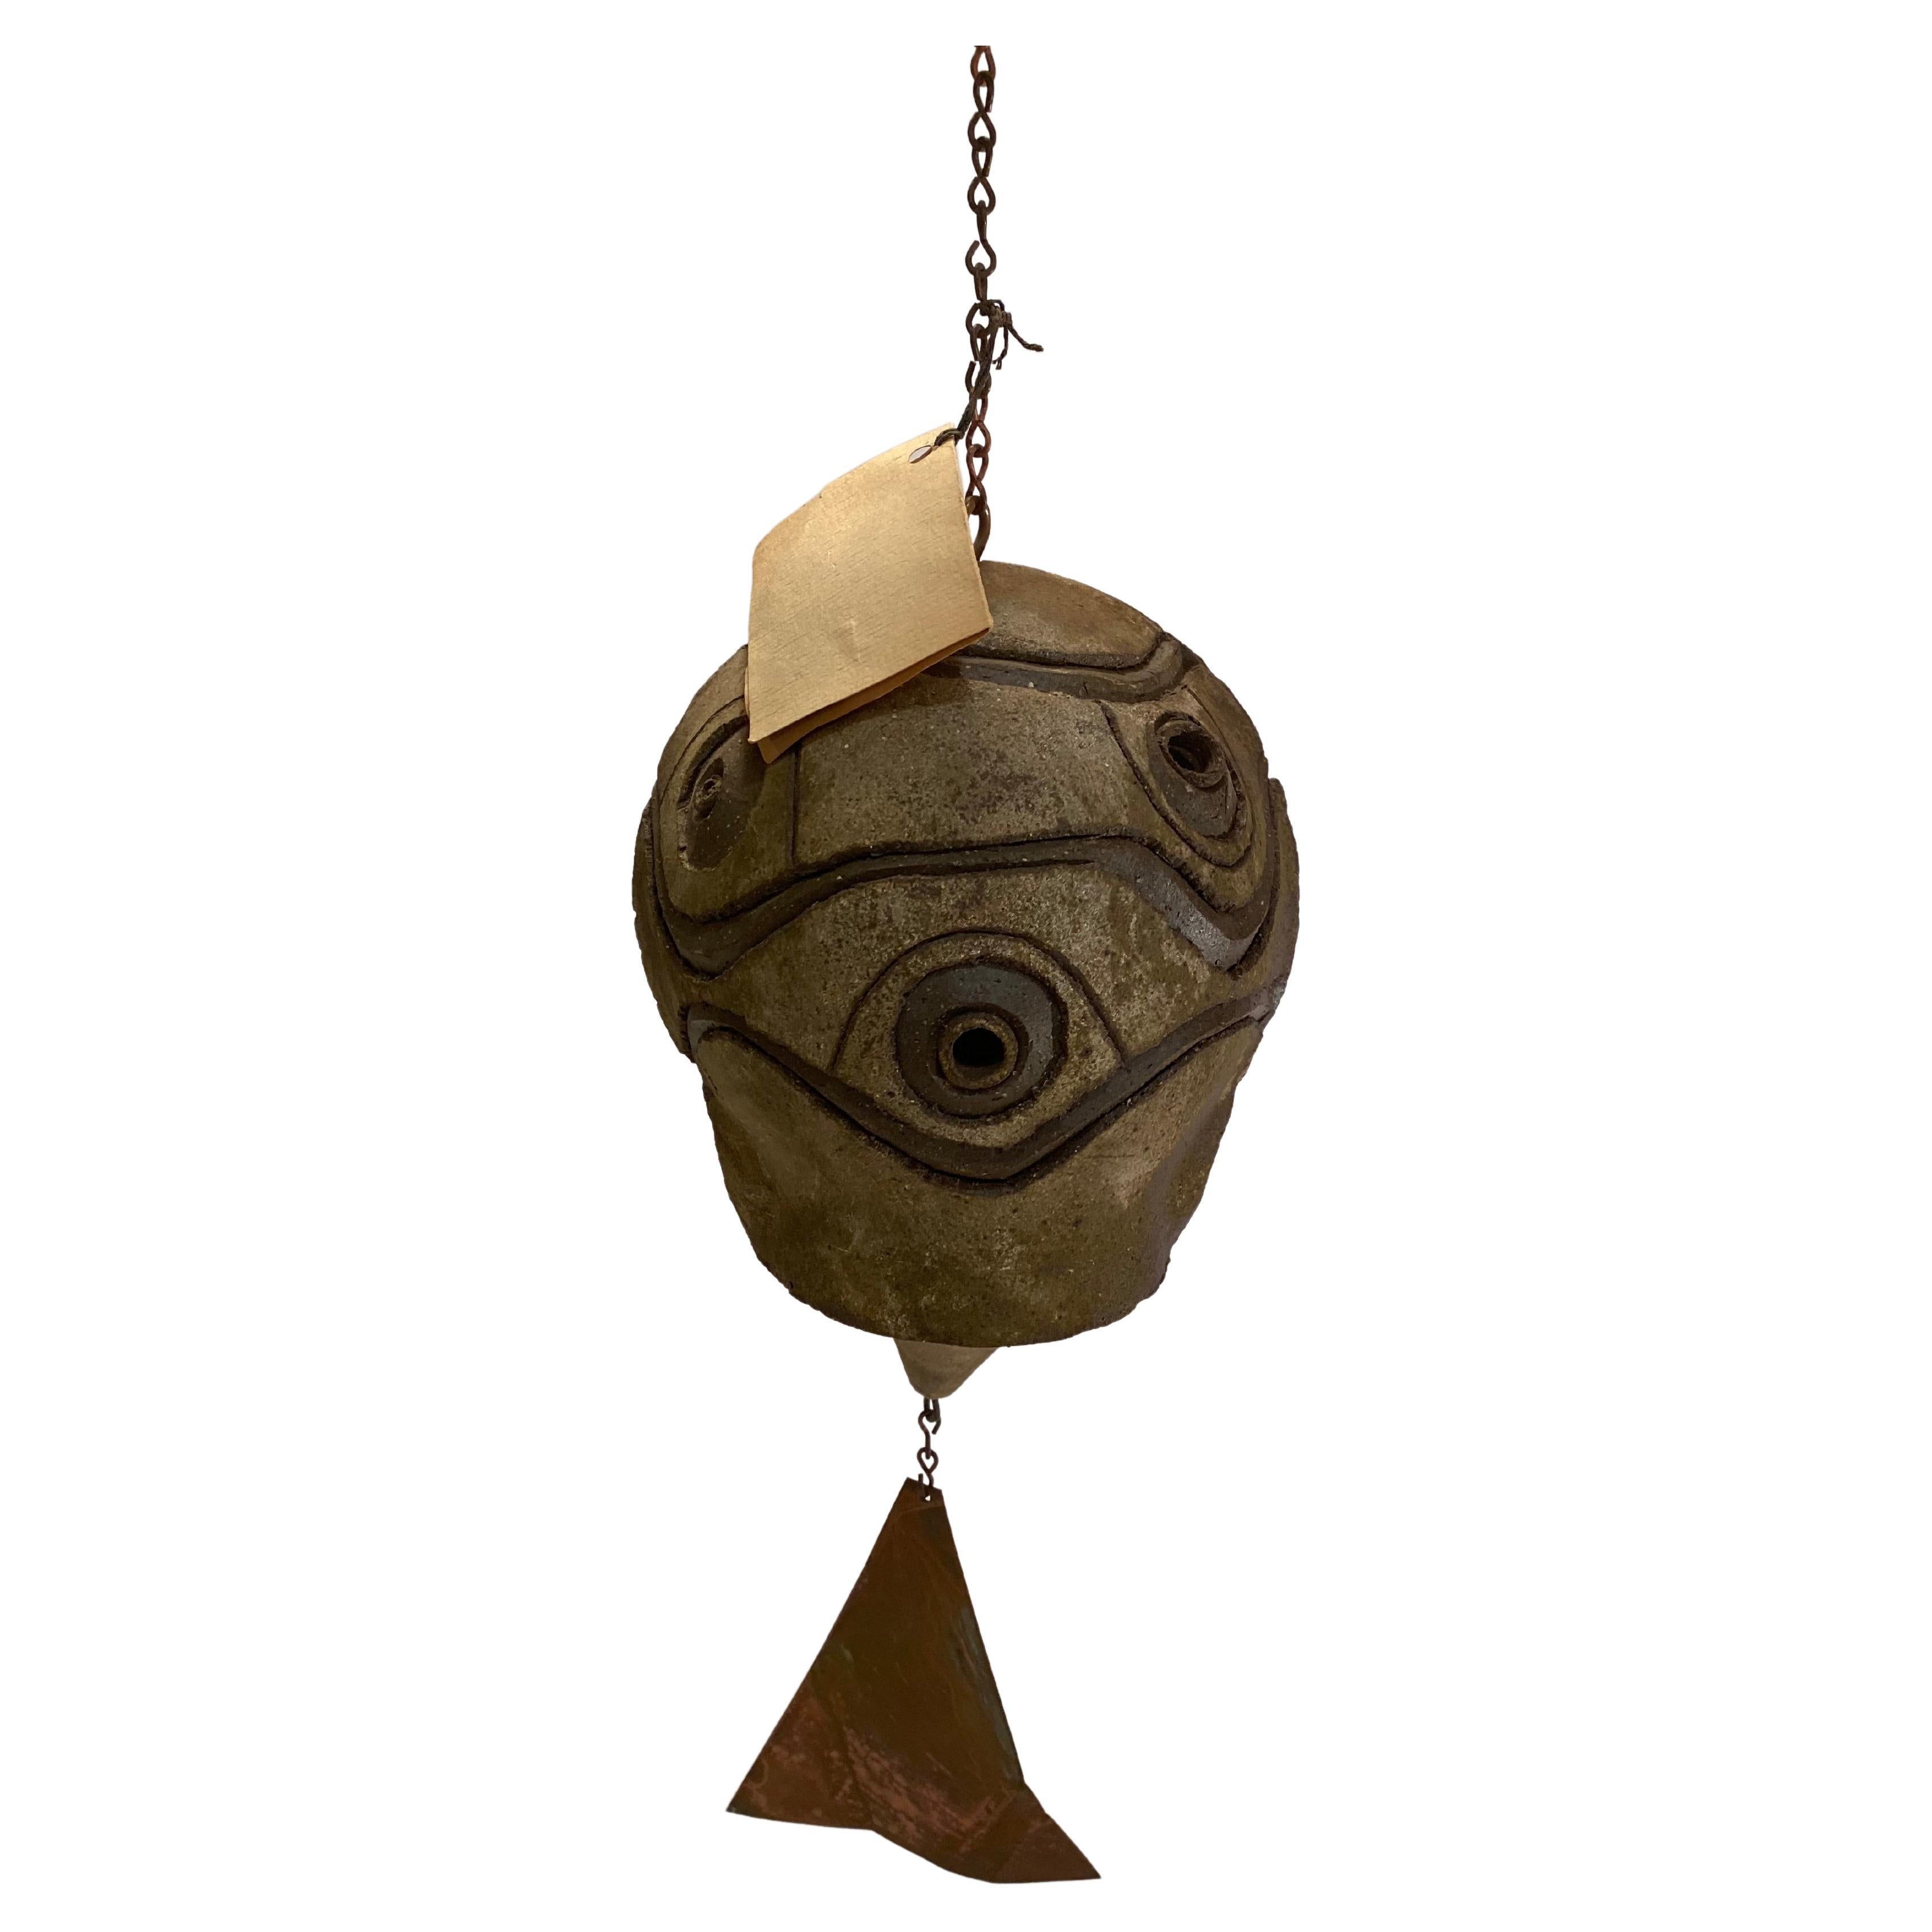 An amazing example of a Paolo Soleri Arcosanti wind and earth bell. Comprised of a earthenware pottery bell, clapper with a copper 